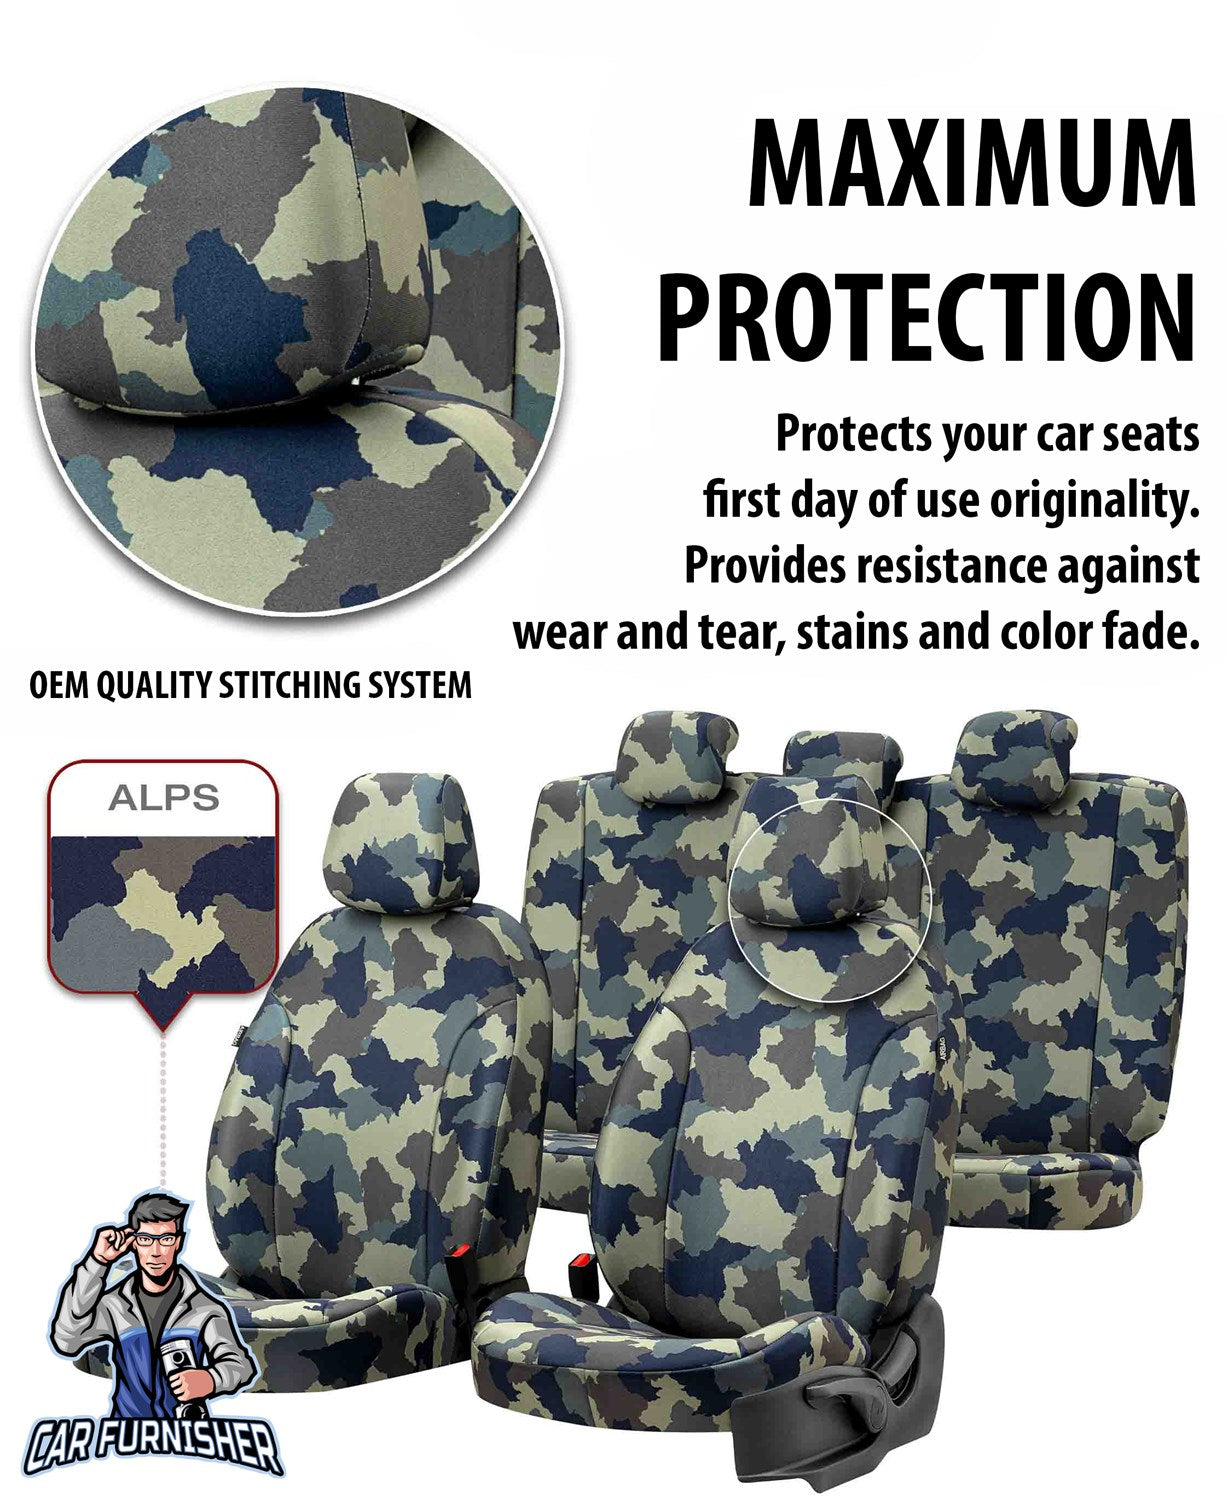 Nissan Almera Seat Covers Camouflage Waterproof Design Montblanc Camo Waterproof Fabric